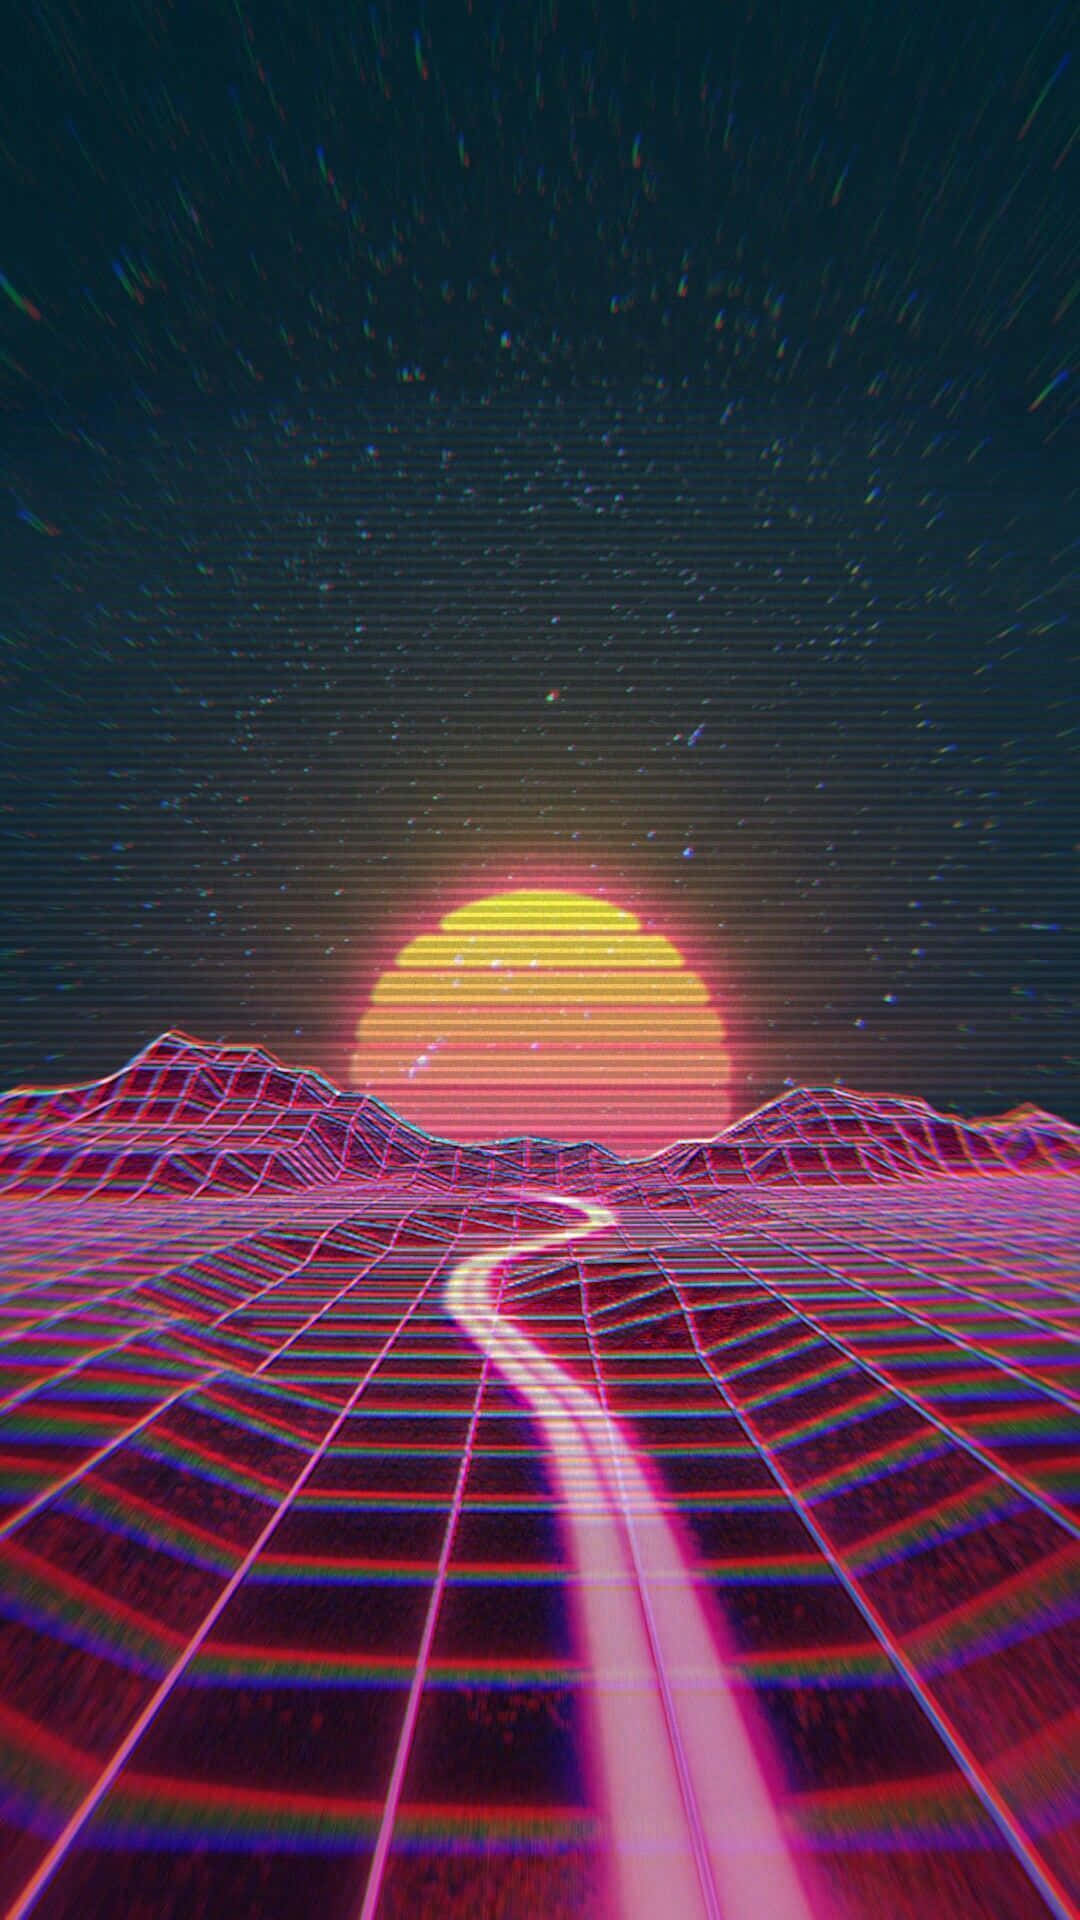 "Bring the 80s Aesthetic to Your Iphone" Wallpaper